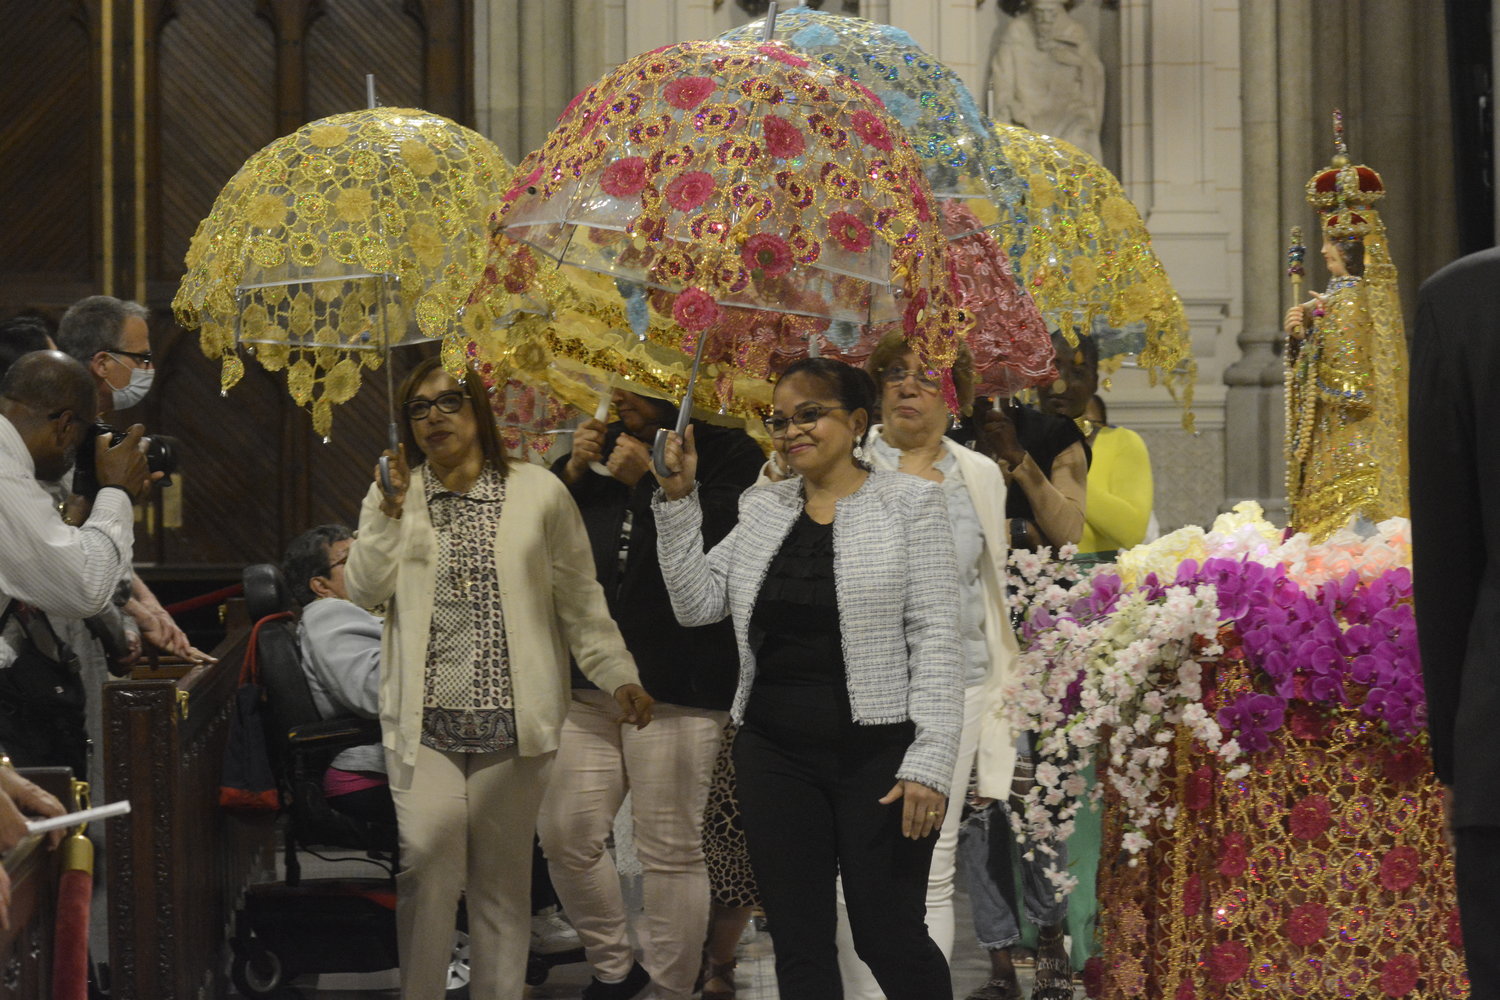 Ornate umbrellas were held aloft in honor of Our Lady of Good Health, right, at St. Patrick’s Cathedral.